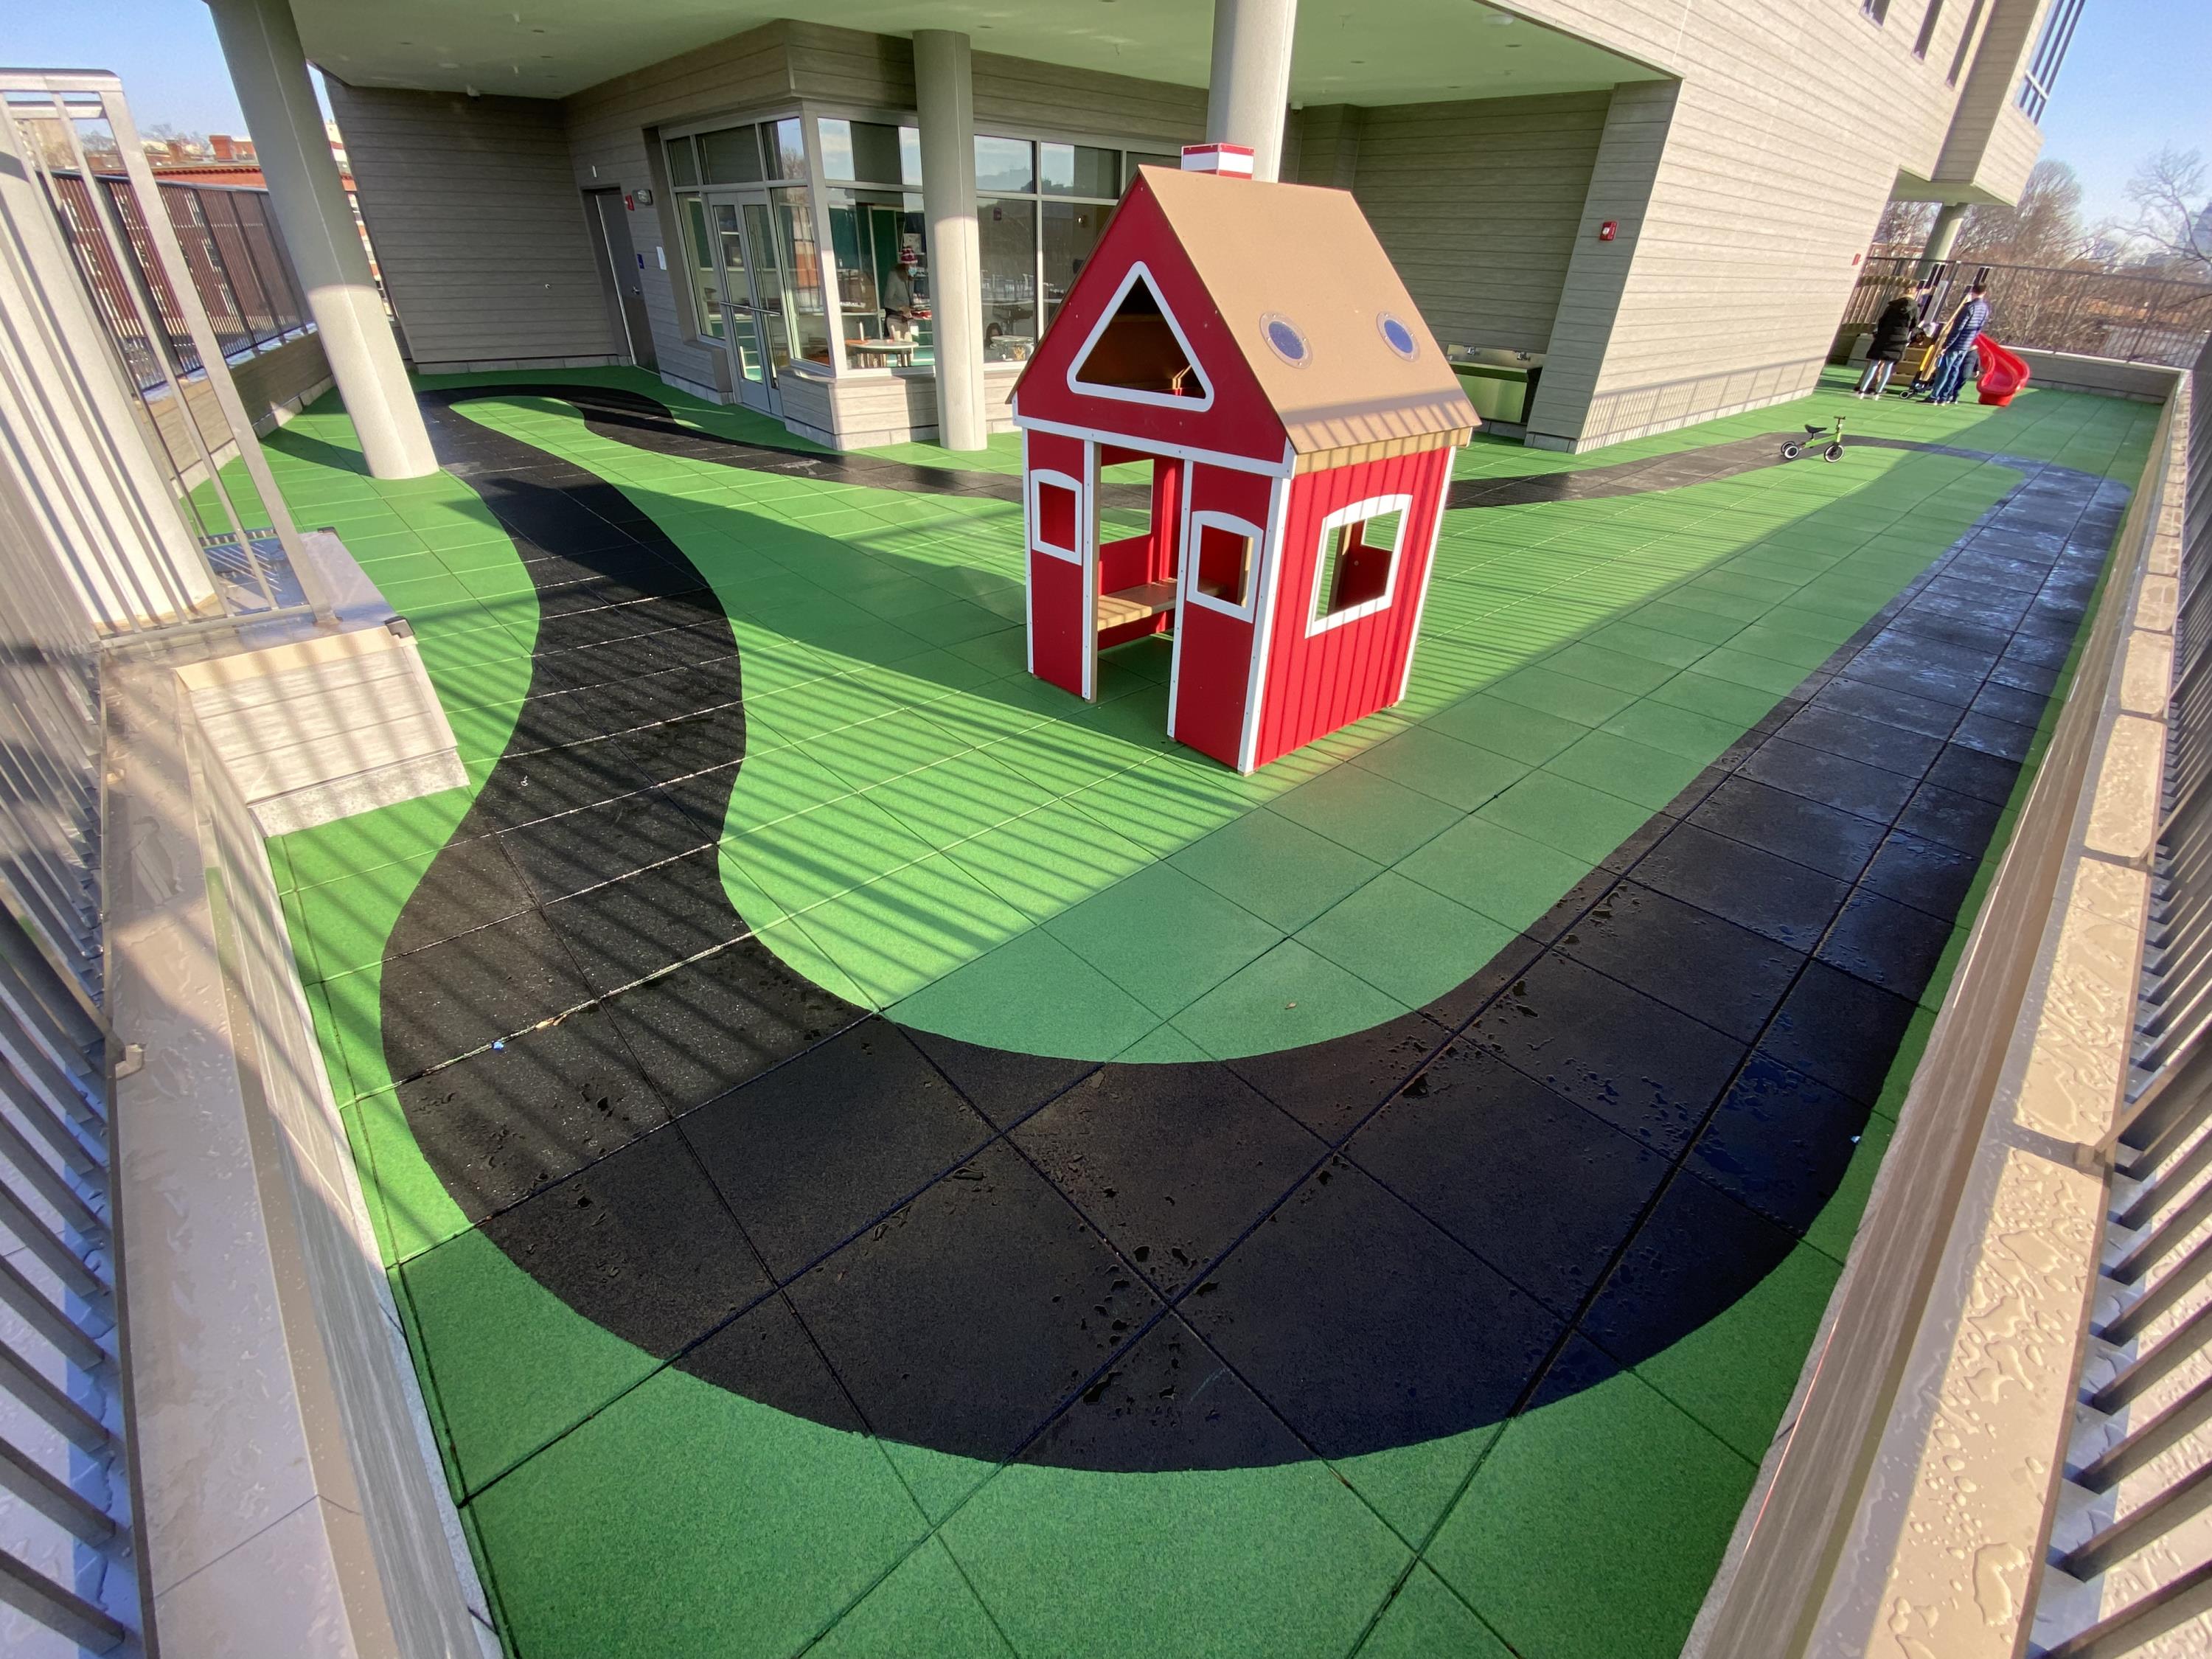 UNITY Rubber Pavers on School Rooftop Playground in Boston w/Painted Track (4)